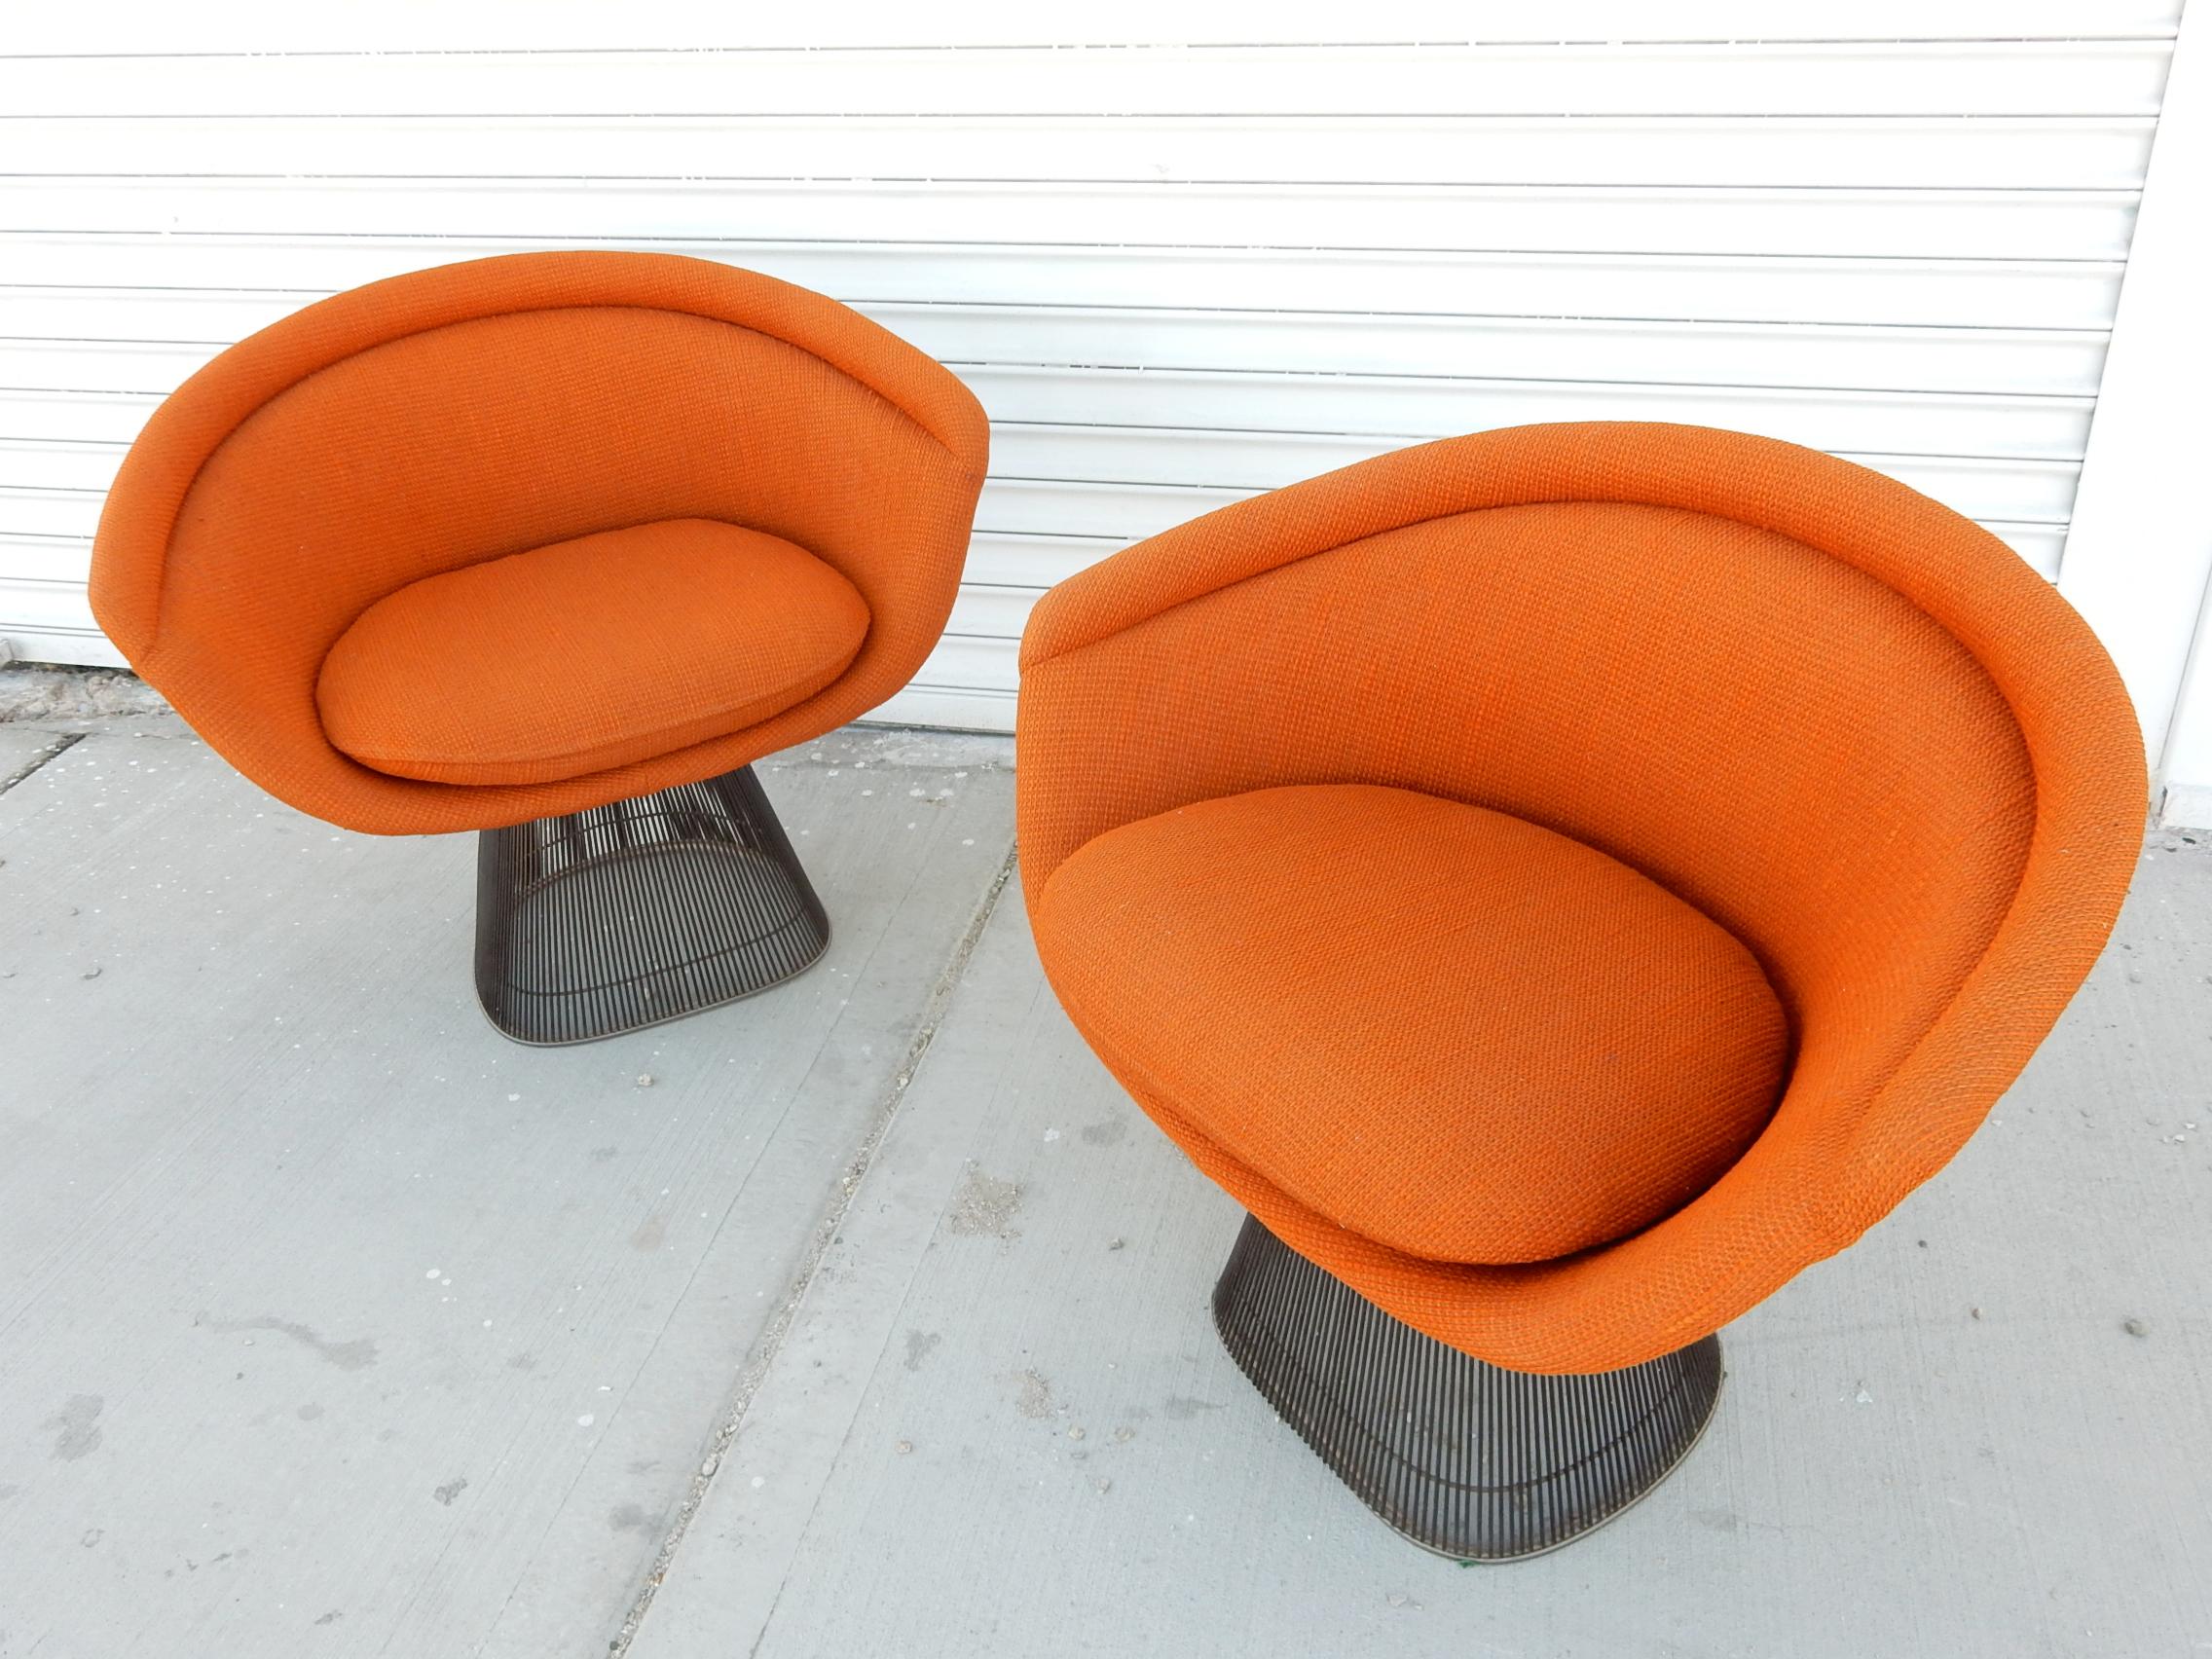 American Pair of Warren Platner for Knoll Lounge Chairs Mid-Century Modern, 1978